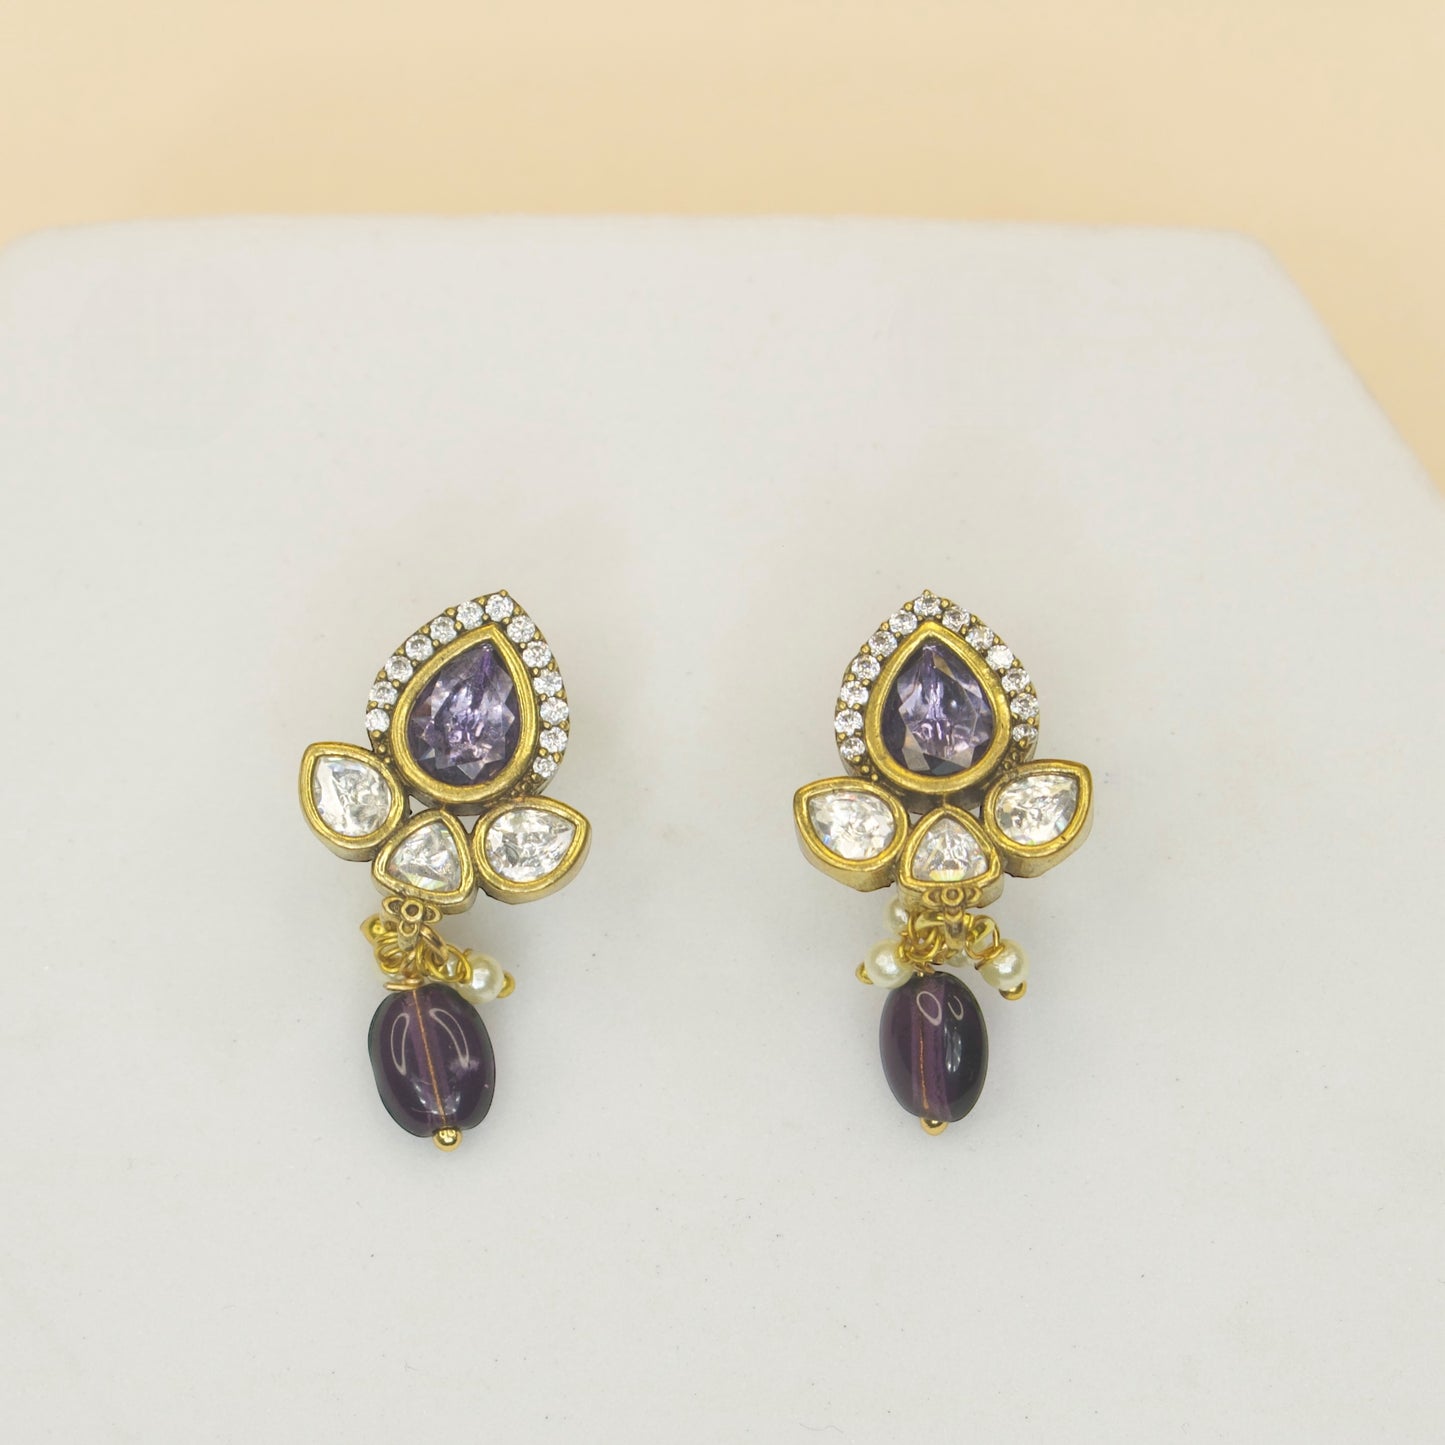 Pear Drop Victorian Stud Earrings in screw-back style. This Victorian Jewellery is available in White, Red,Green & Purple colour variants. 